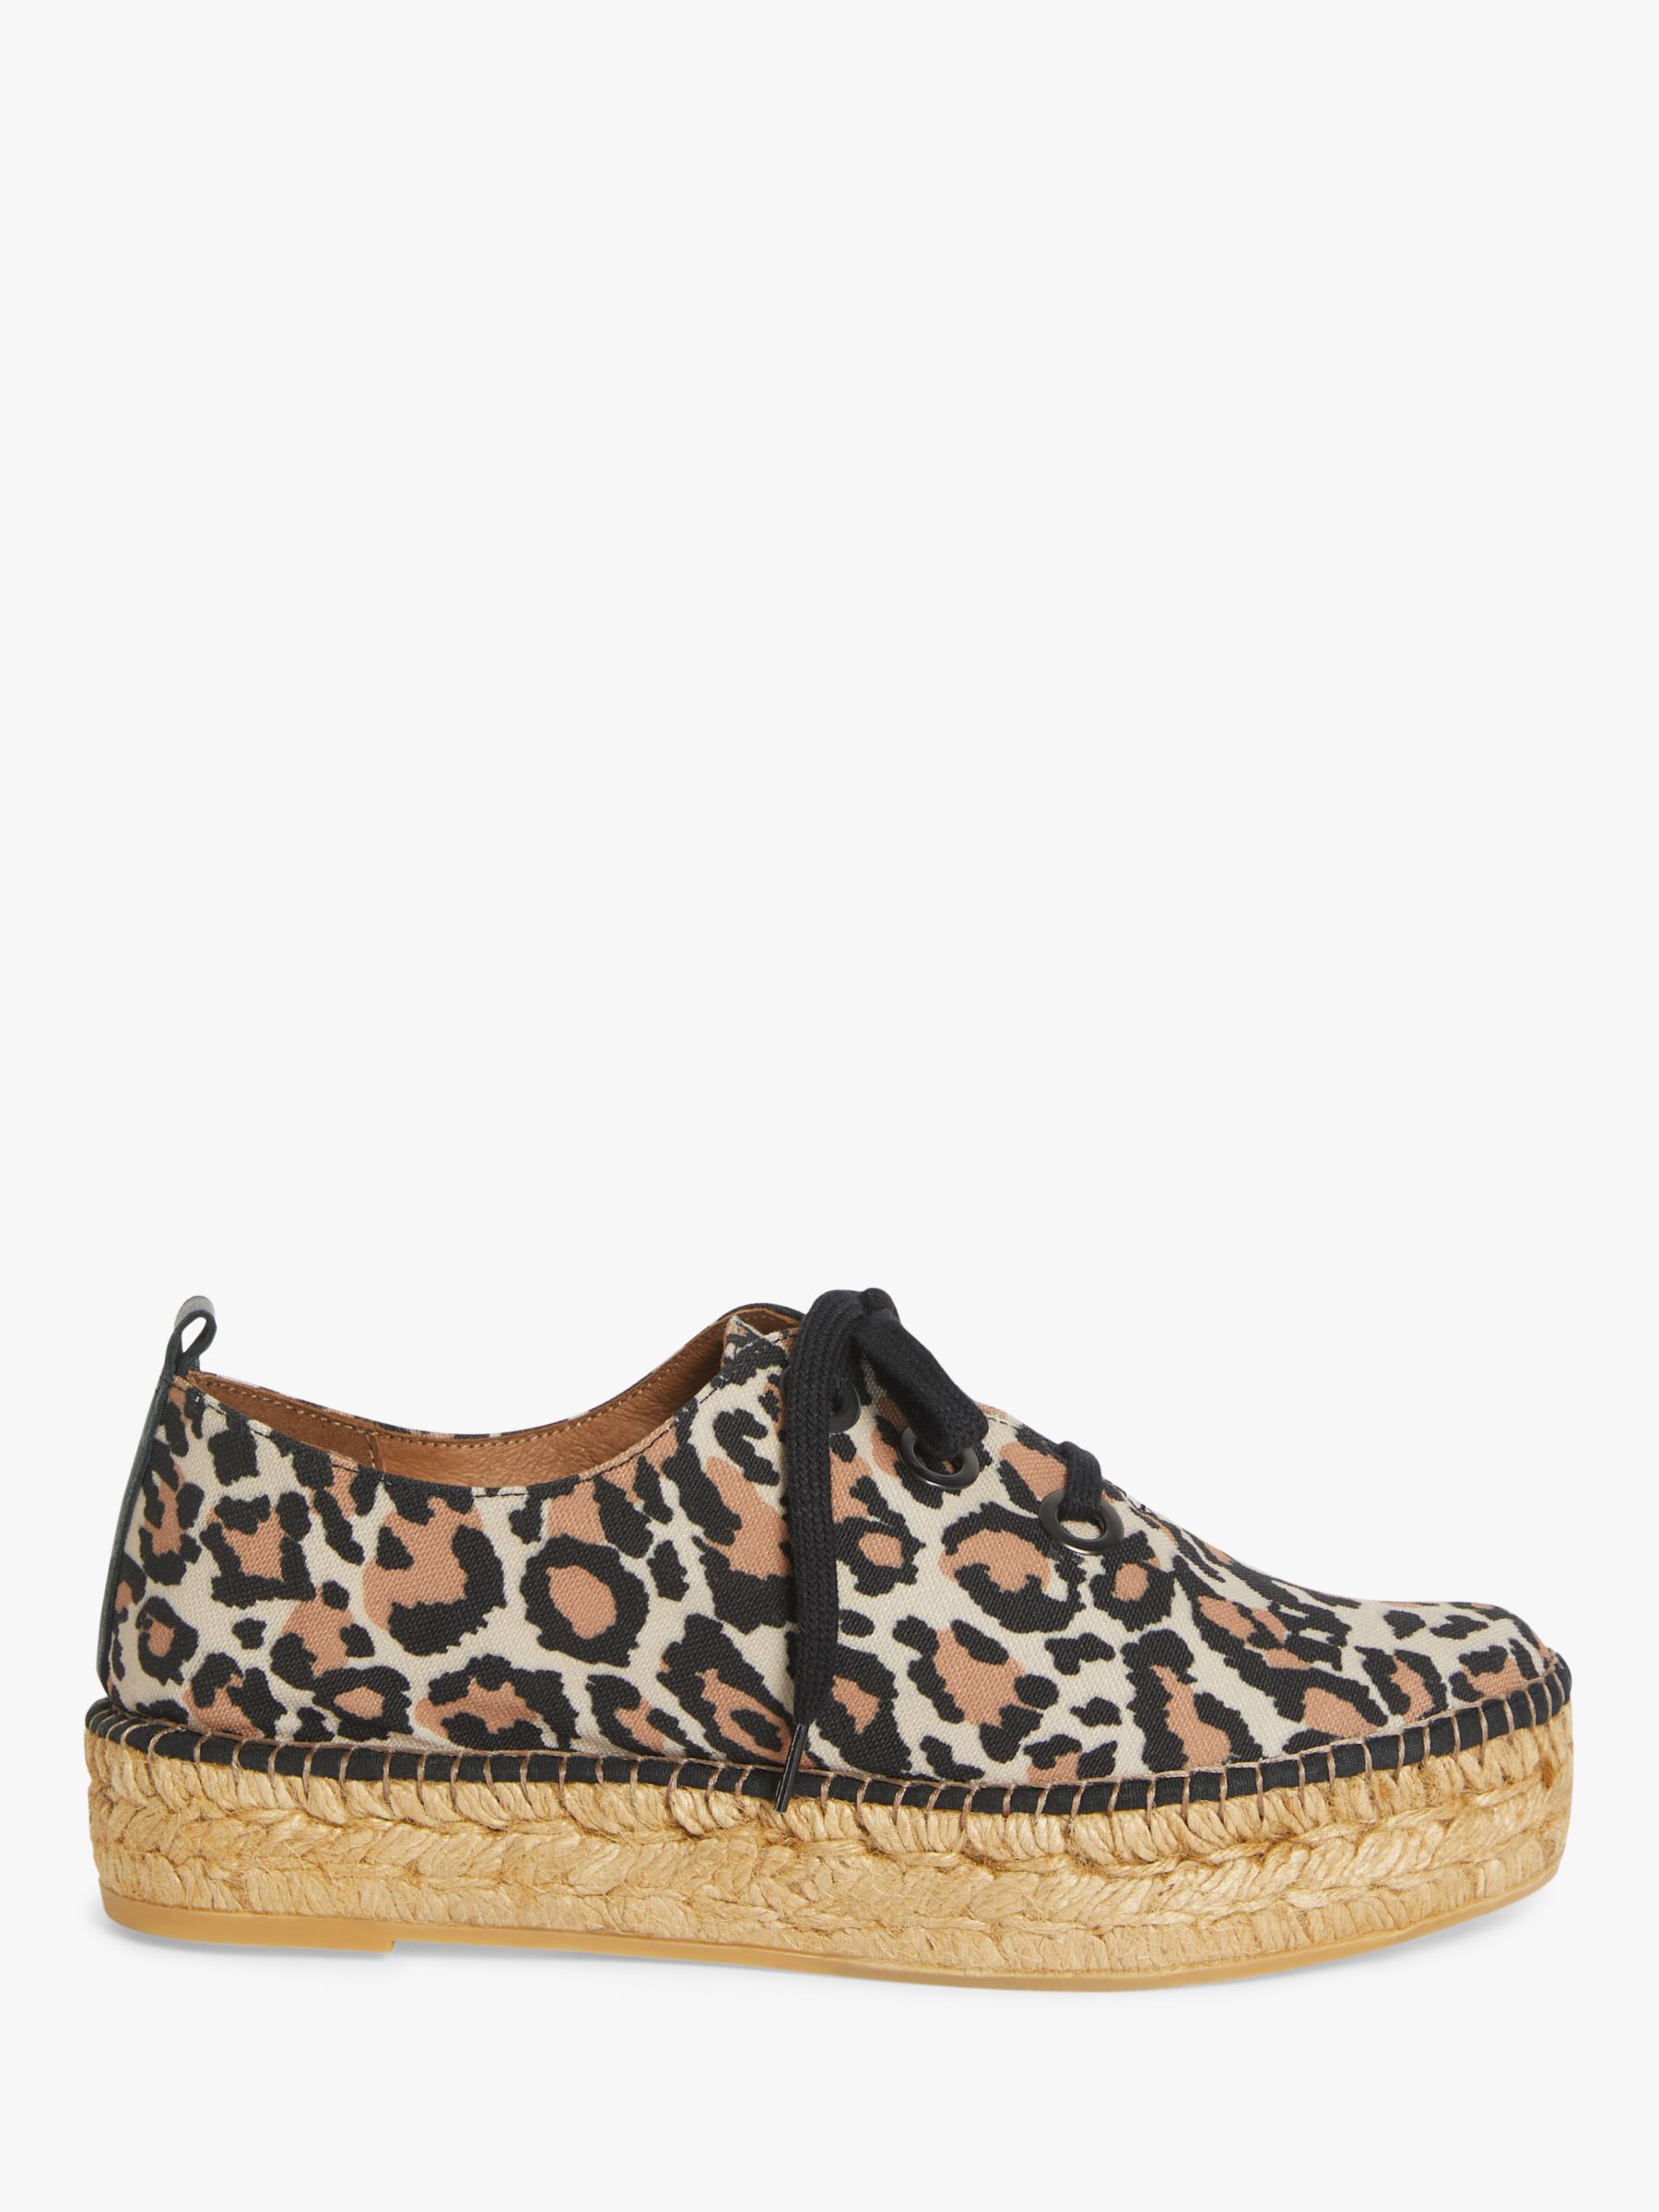 AND/OR Kimmy Espadrille Lace Up Shoes, Leopard Print